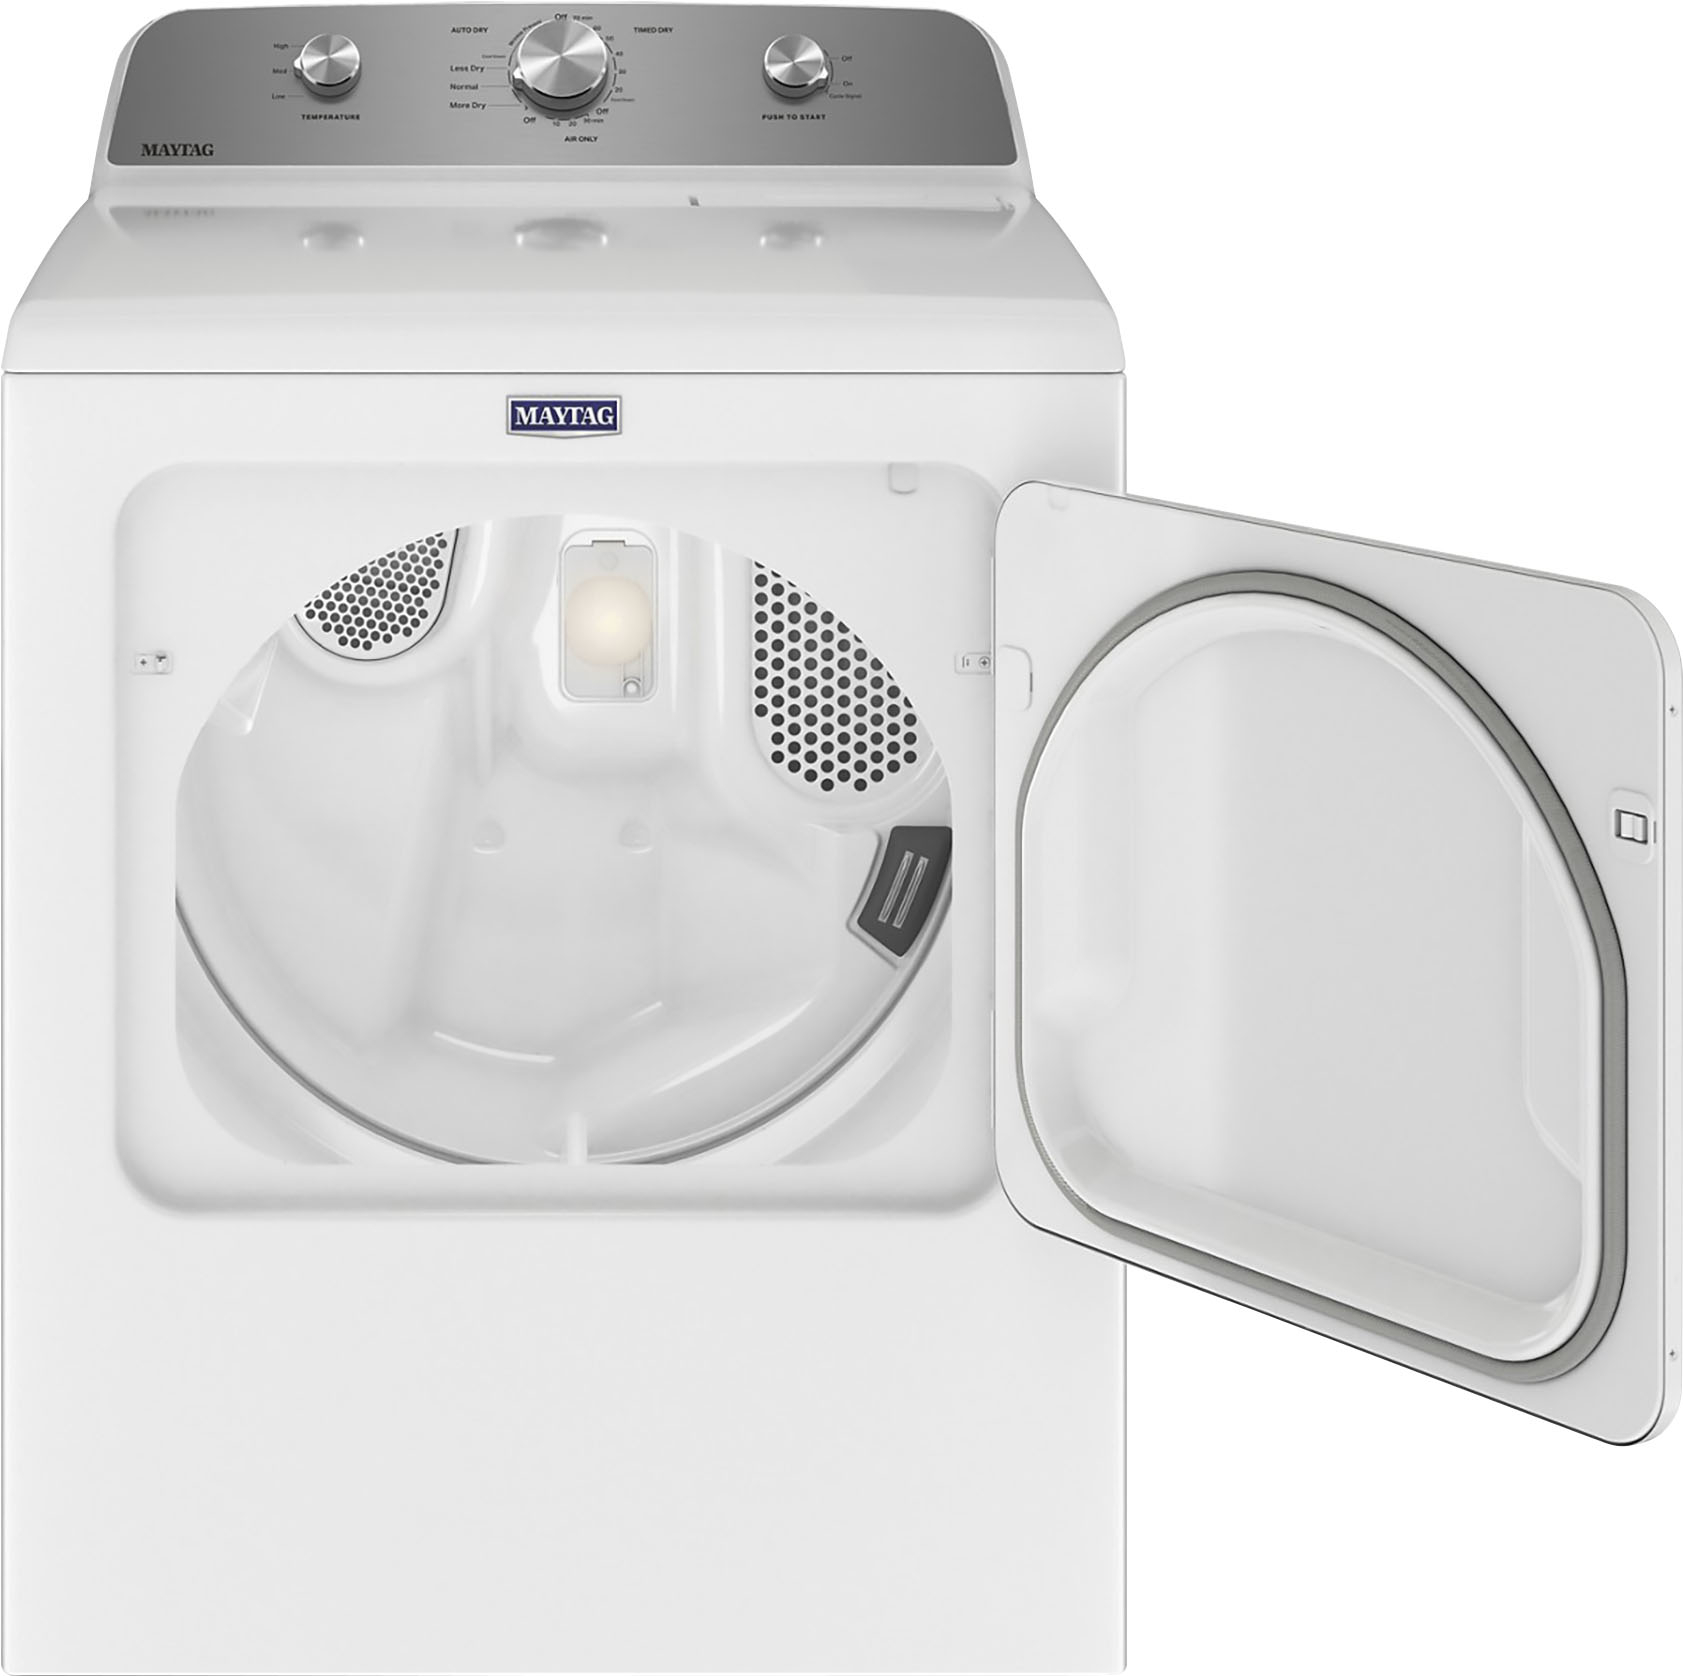 Angle View: Samsung - Geek Squad Certified Refurbished 7.5 Cu. Ft. Stackable Gas Dryer with Sensor Dry - Platinum